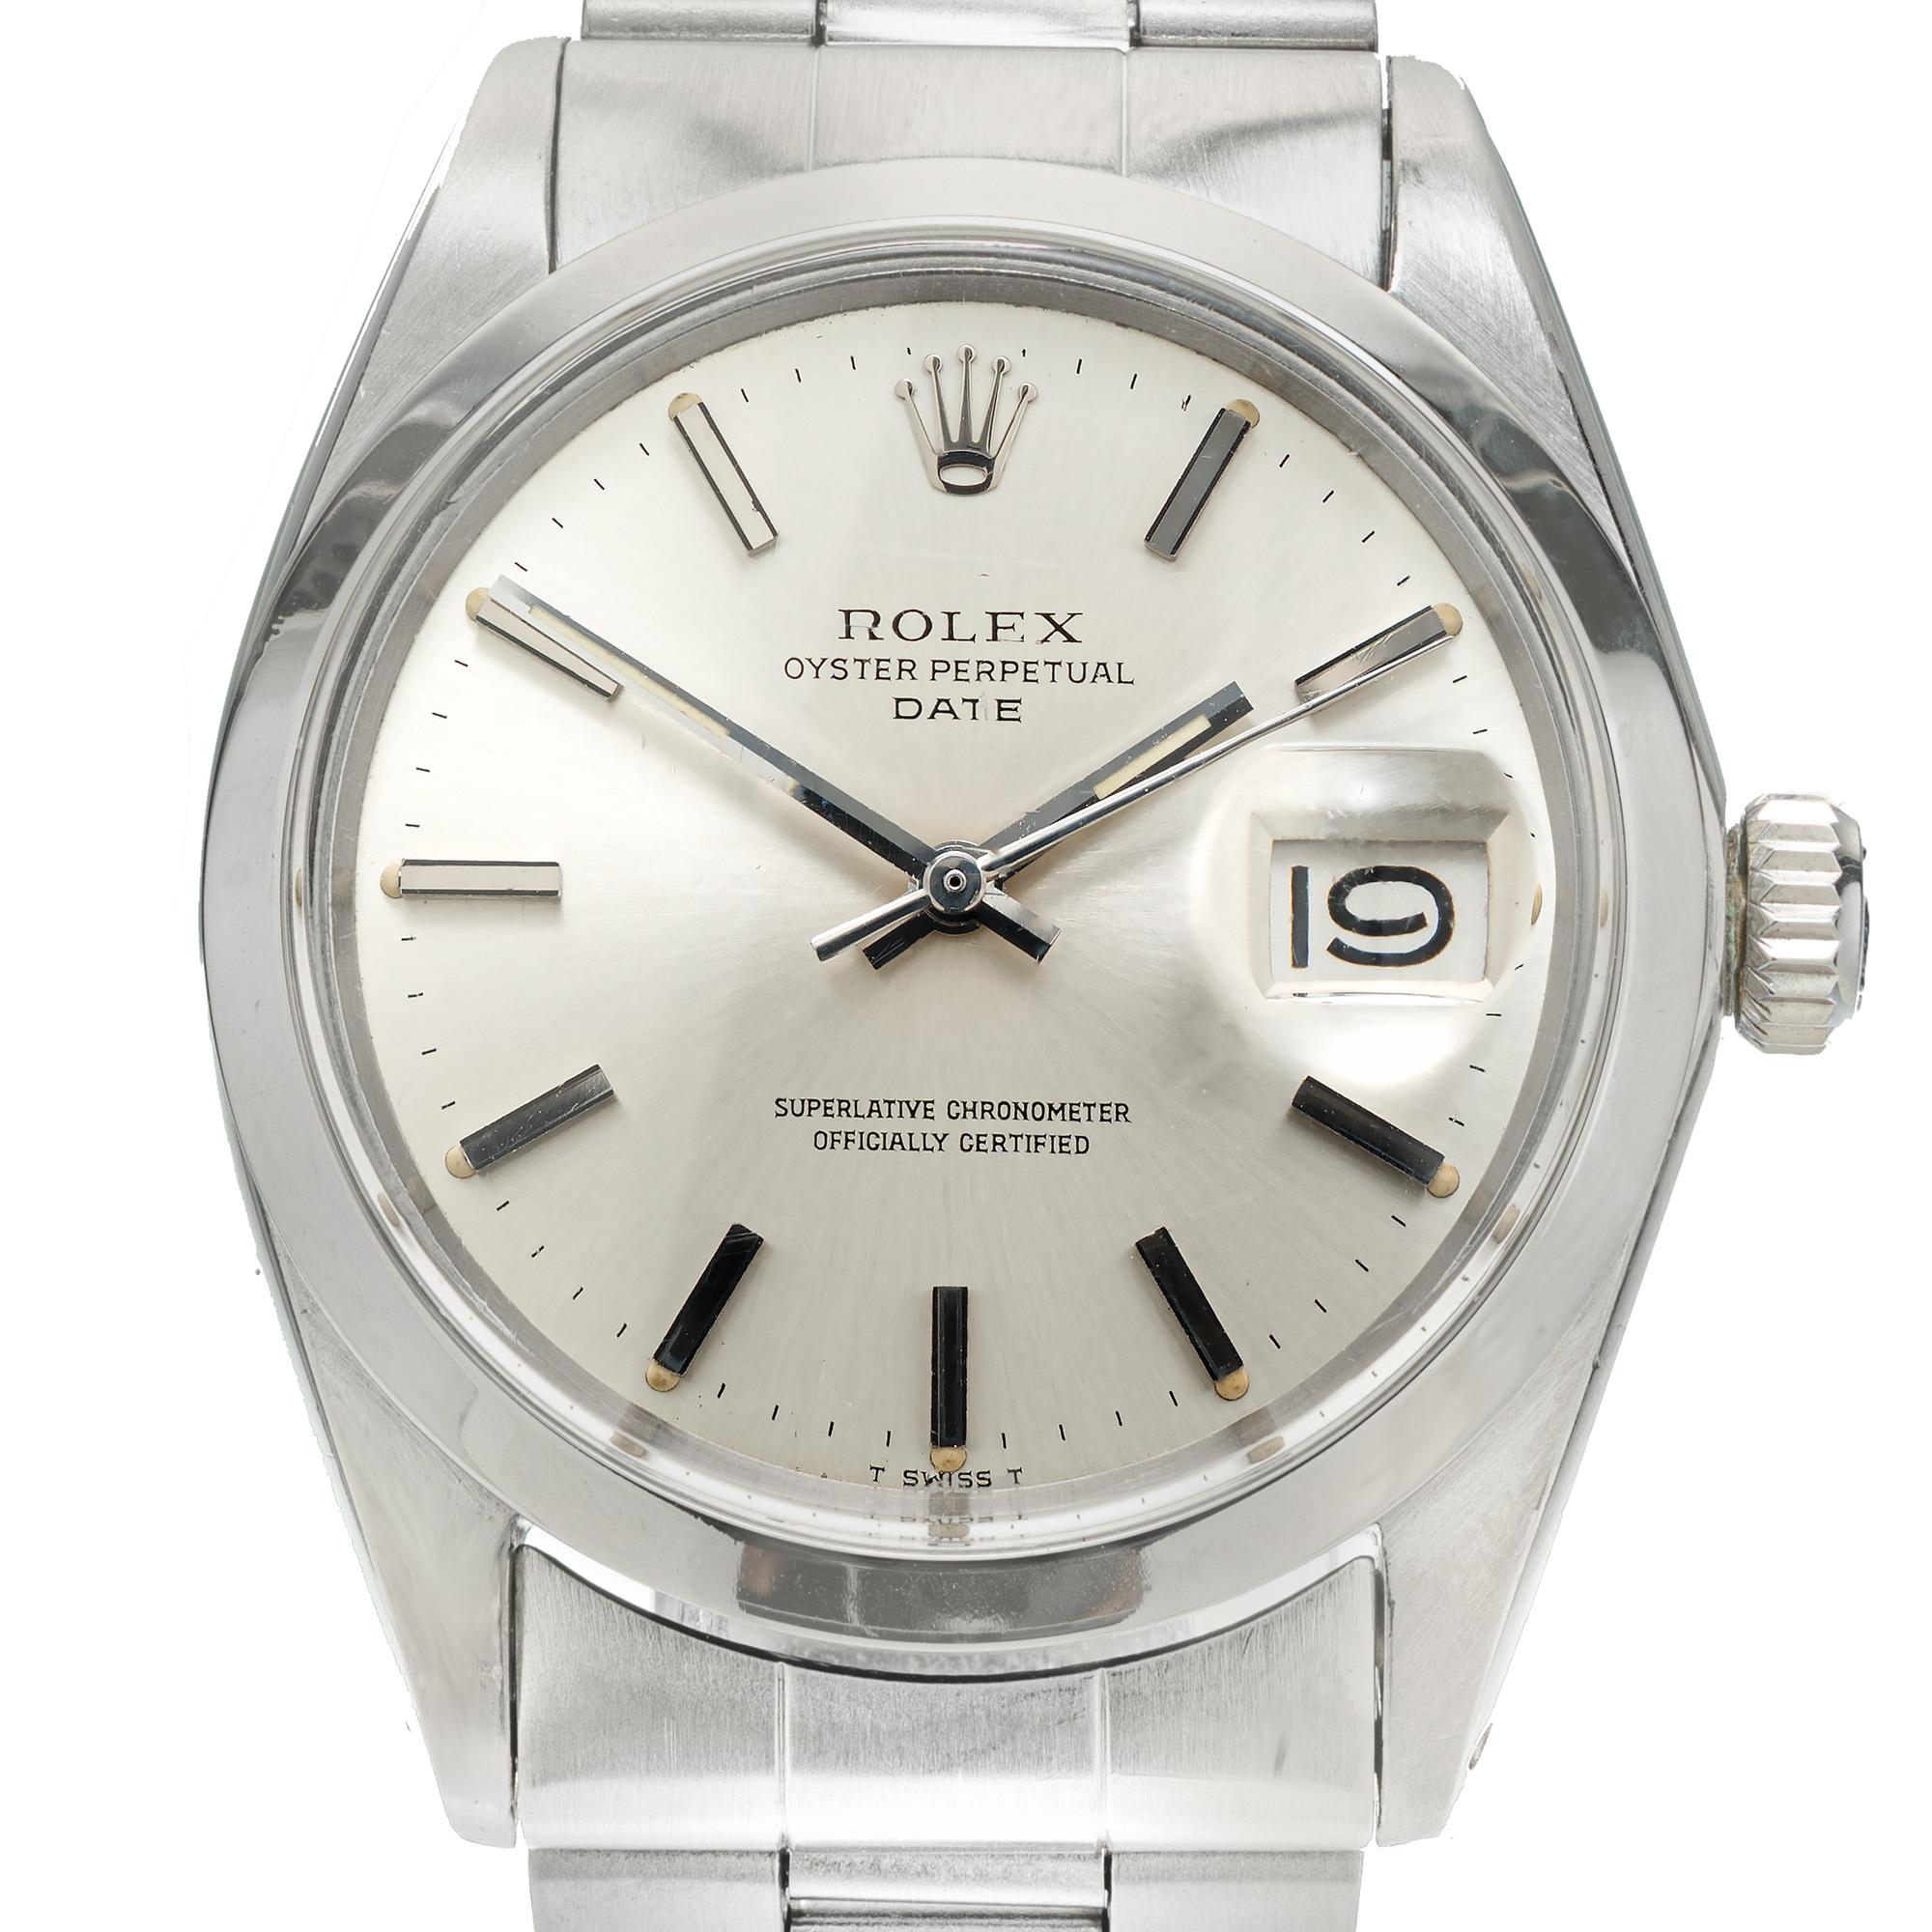 Vintage 1967 Rolex oyster date 34mm watch.  All original model 1500. Minor normal wear. Recently serviced.

Length: 41.91mm
Width: 34mm
Band width at case: 19mm
Case thickness: 13.03mm
Band: stainless steel oyster band
Crystal: acrylic 
Dial: silver